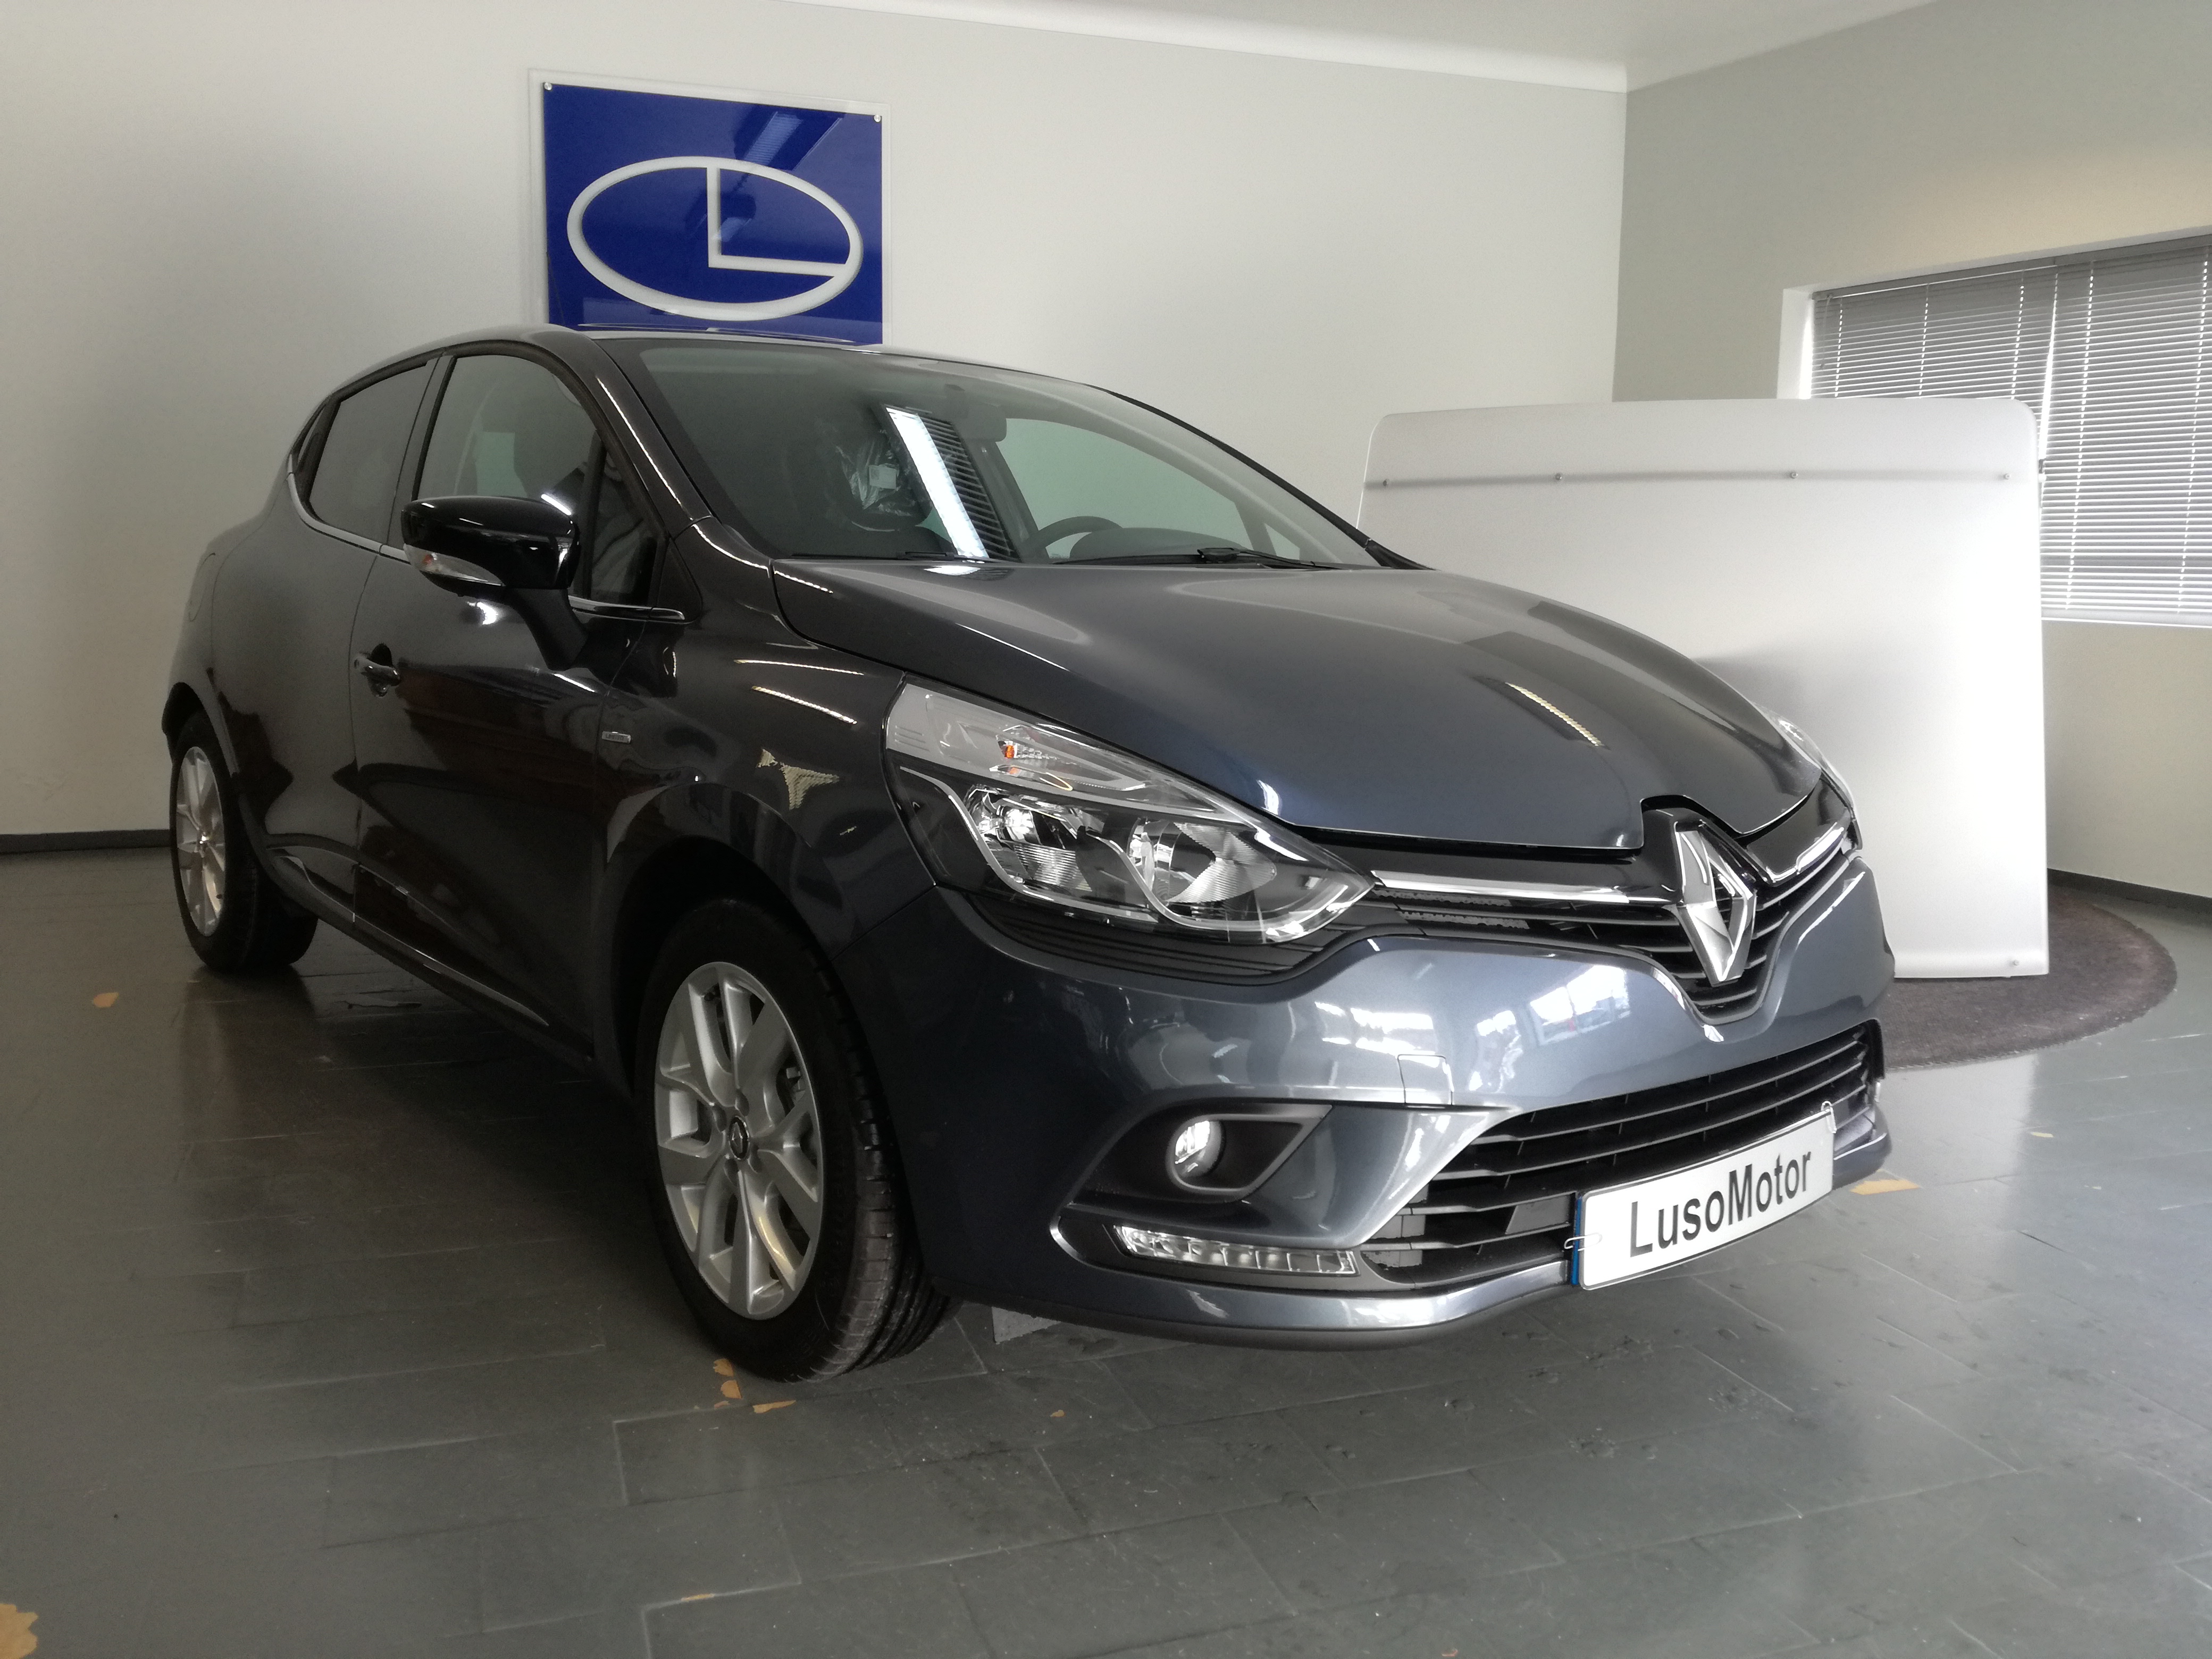 Renault Clio 0.9 TCE Limited 90 CV Lusomotor